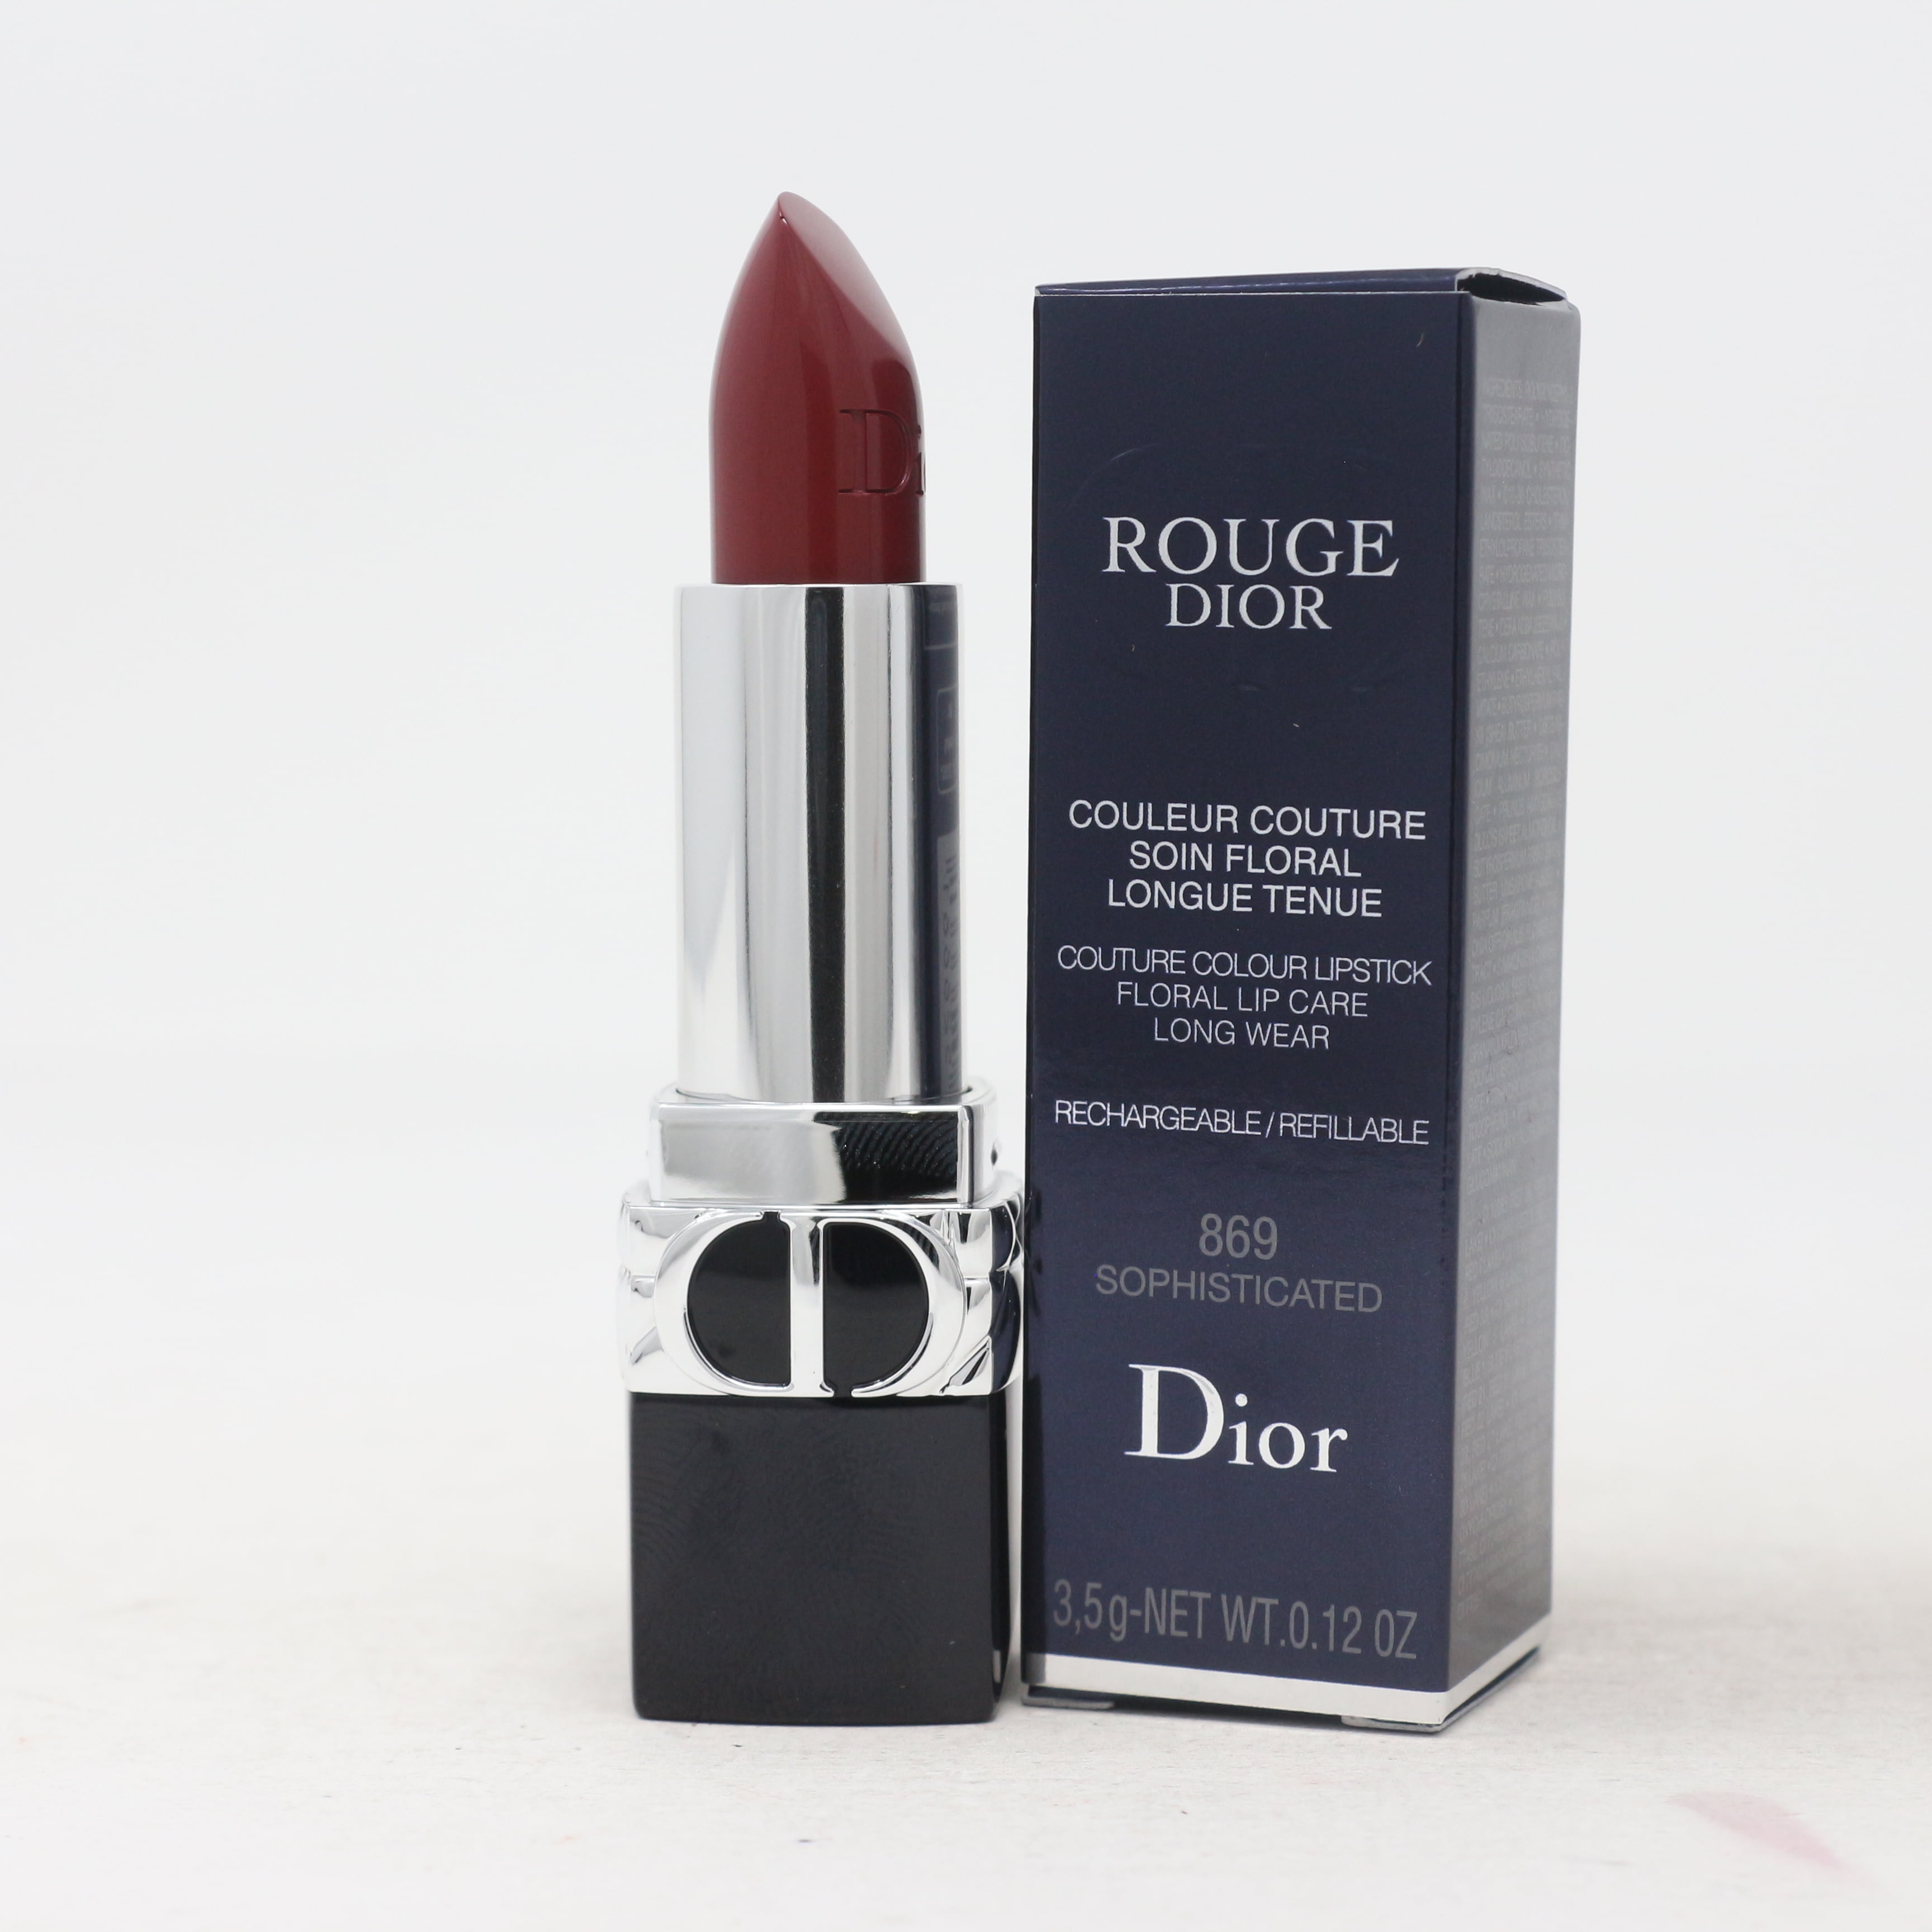 Dior Rouge Dior Lipstick 012oz 869 Sophisticated Satin New With Box 